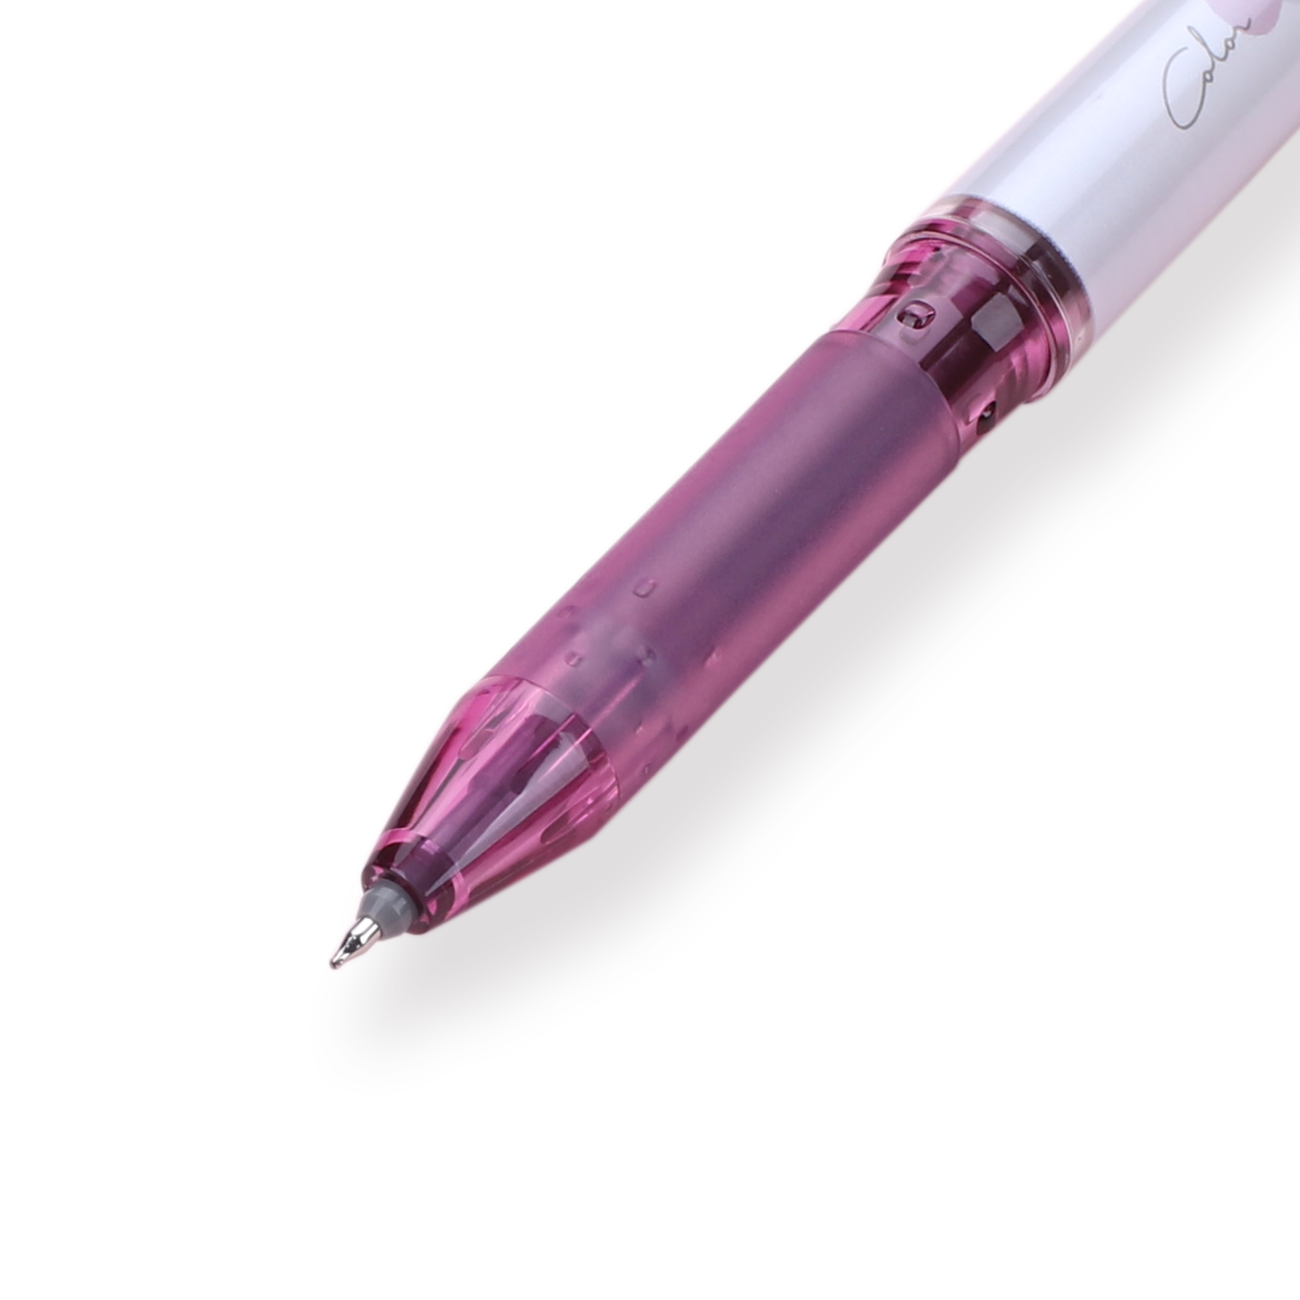 Pilot ILMILY Limited Edition Erasable Gel Pen - 0.4 mm - Wine Red / Gray - Stationery Pal